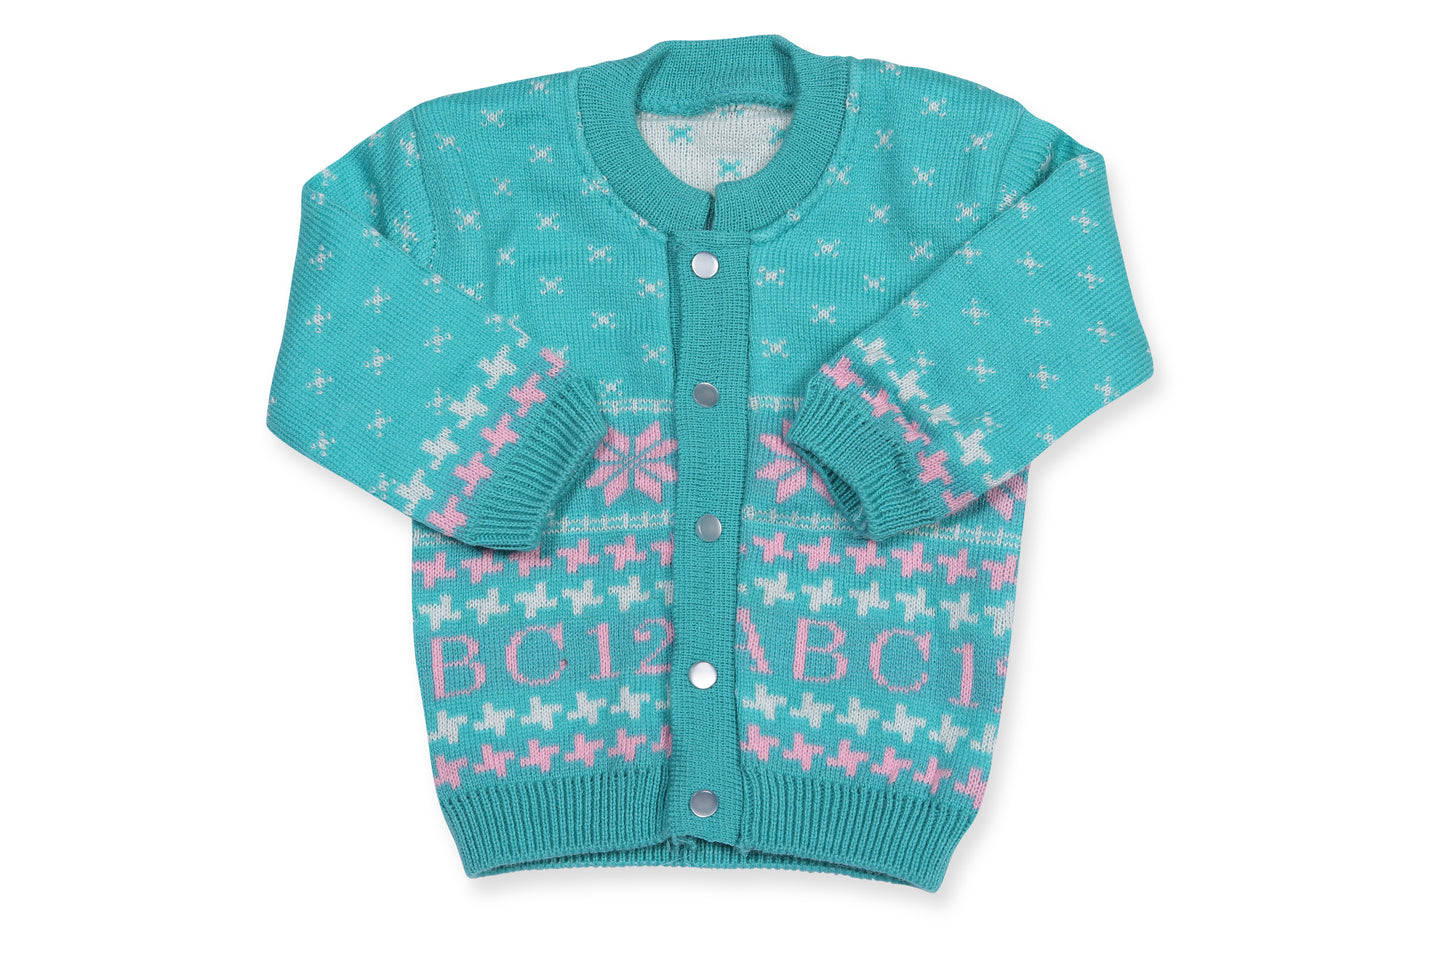 Baby Knitted Sweater, Leggings, Cap & Booties Full Suit- ABC 123 (4 Pcs) Turquoise